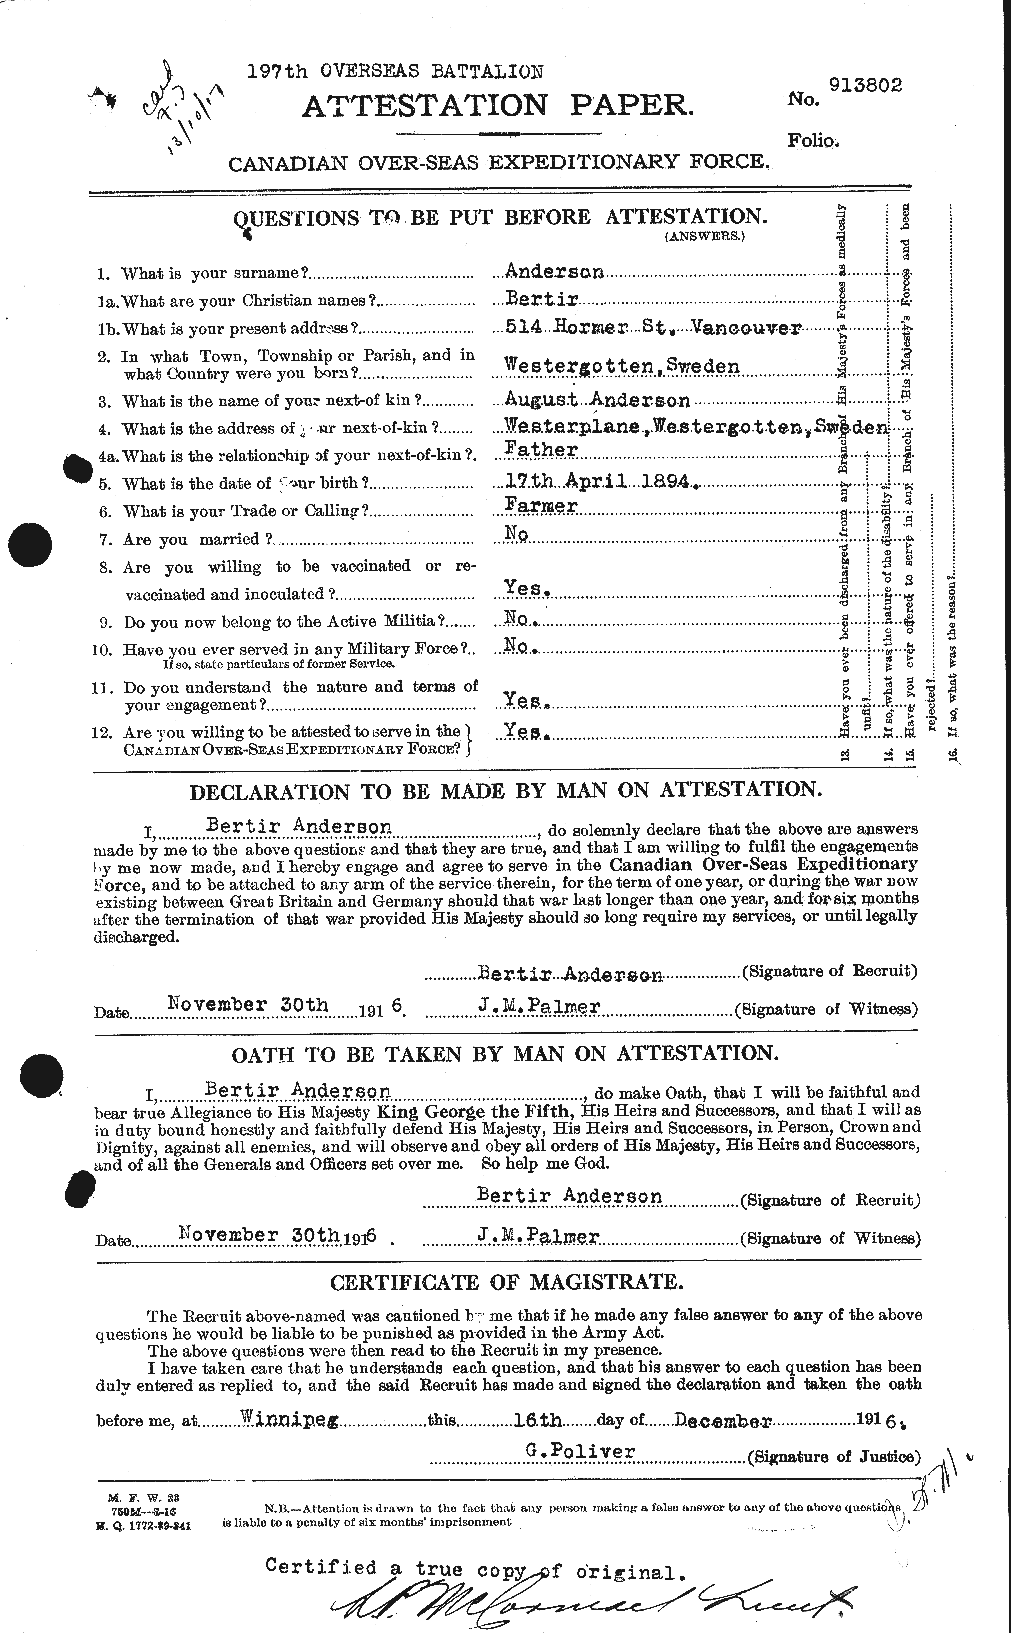 Personnel Records of the First World War - CEF 209311a